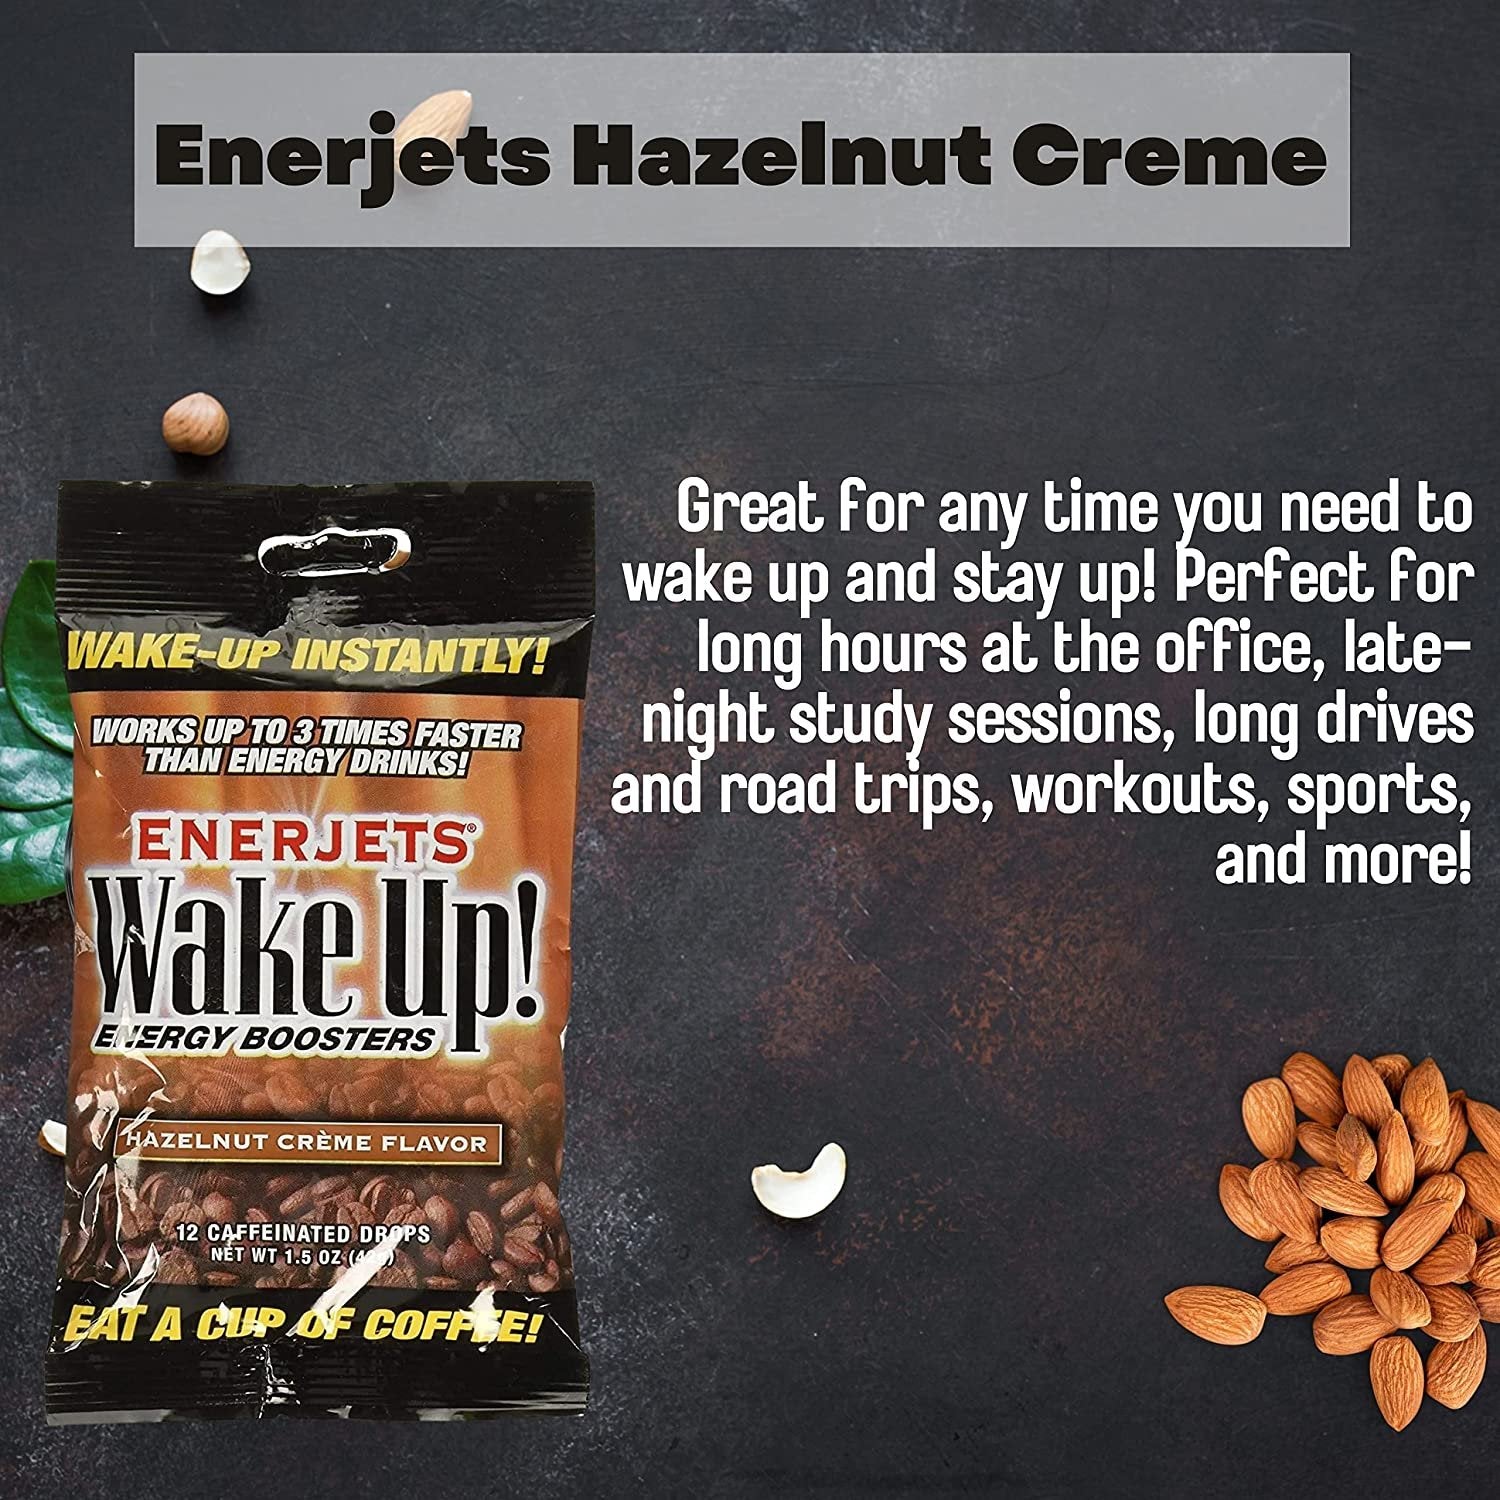 Enerjets Wake Up Energy Booster Caffeinated Drops - Instant Coffee Energy Supplements - Hazelnut Creme Flavor - Pack of 3, 12 Drops Per Package with Worldwide Nutrition Multi Purpose Key Chain